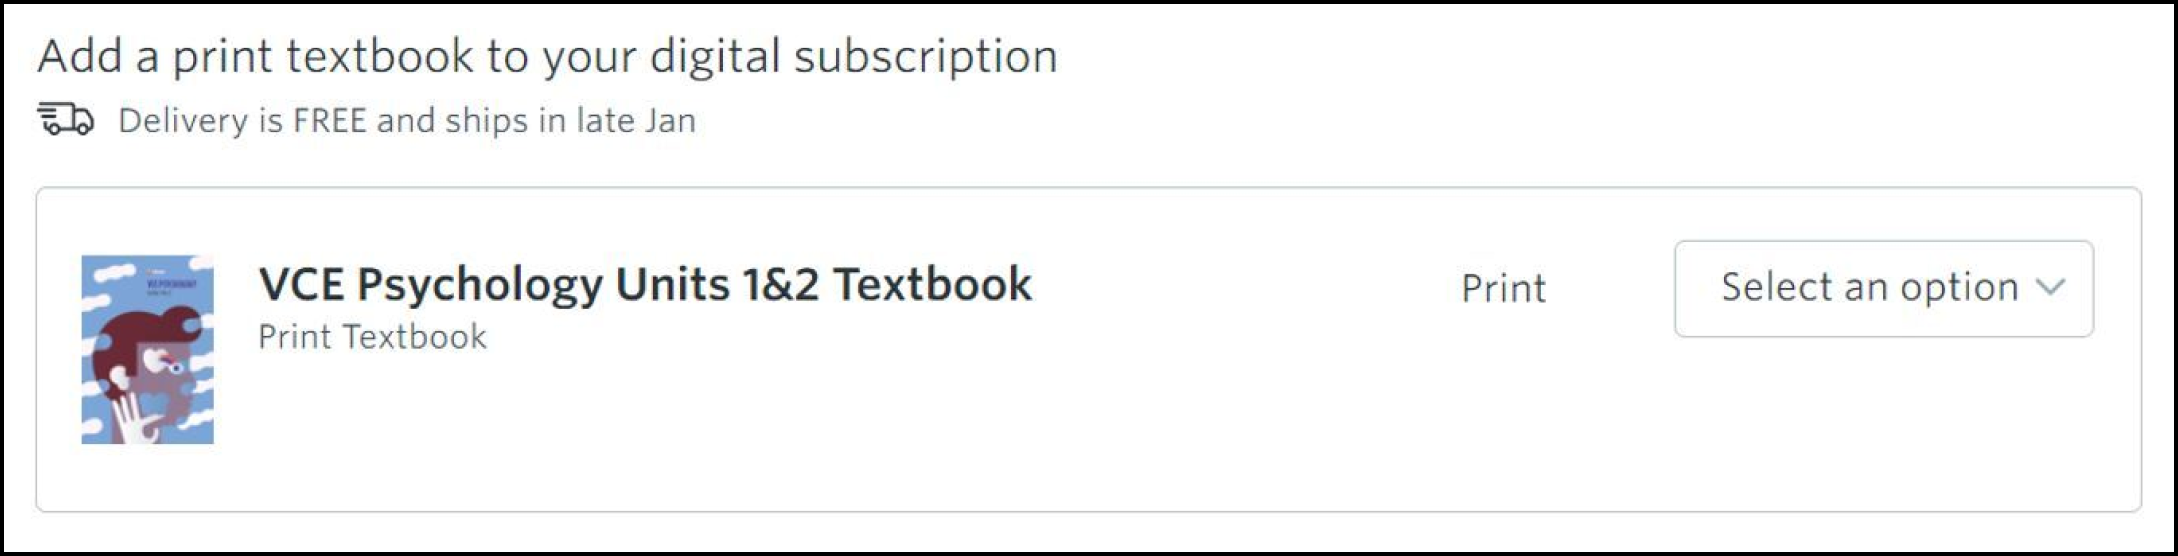 Add_Textbook_Option.png